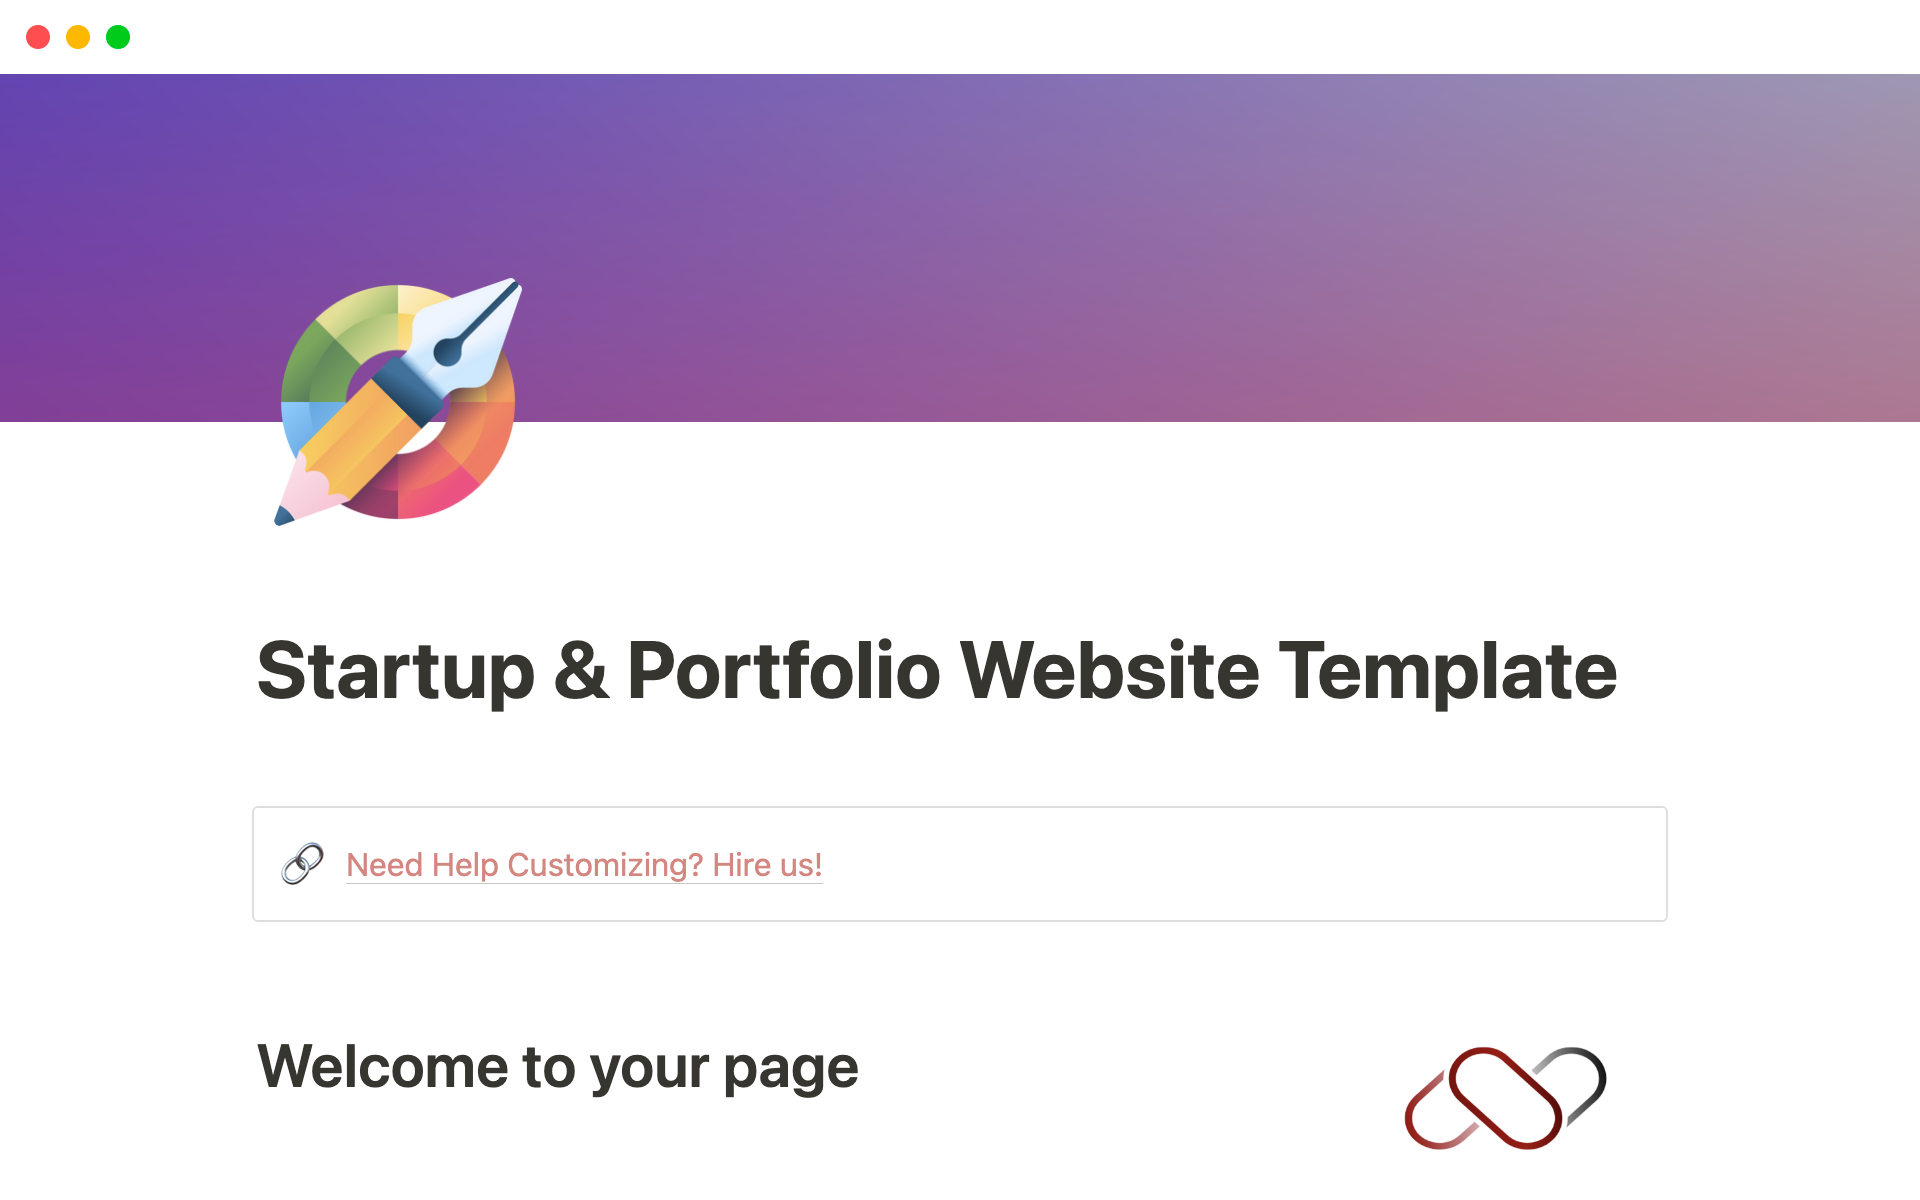 Create your great website today using our Notion website template kit best for startups, blogs, portfolios and more!